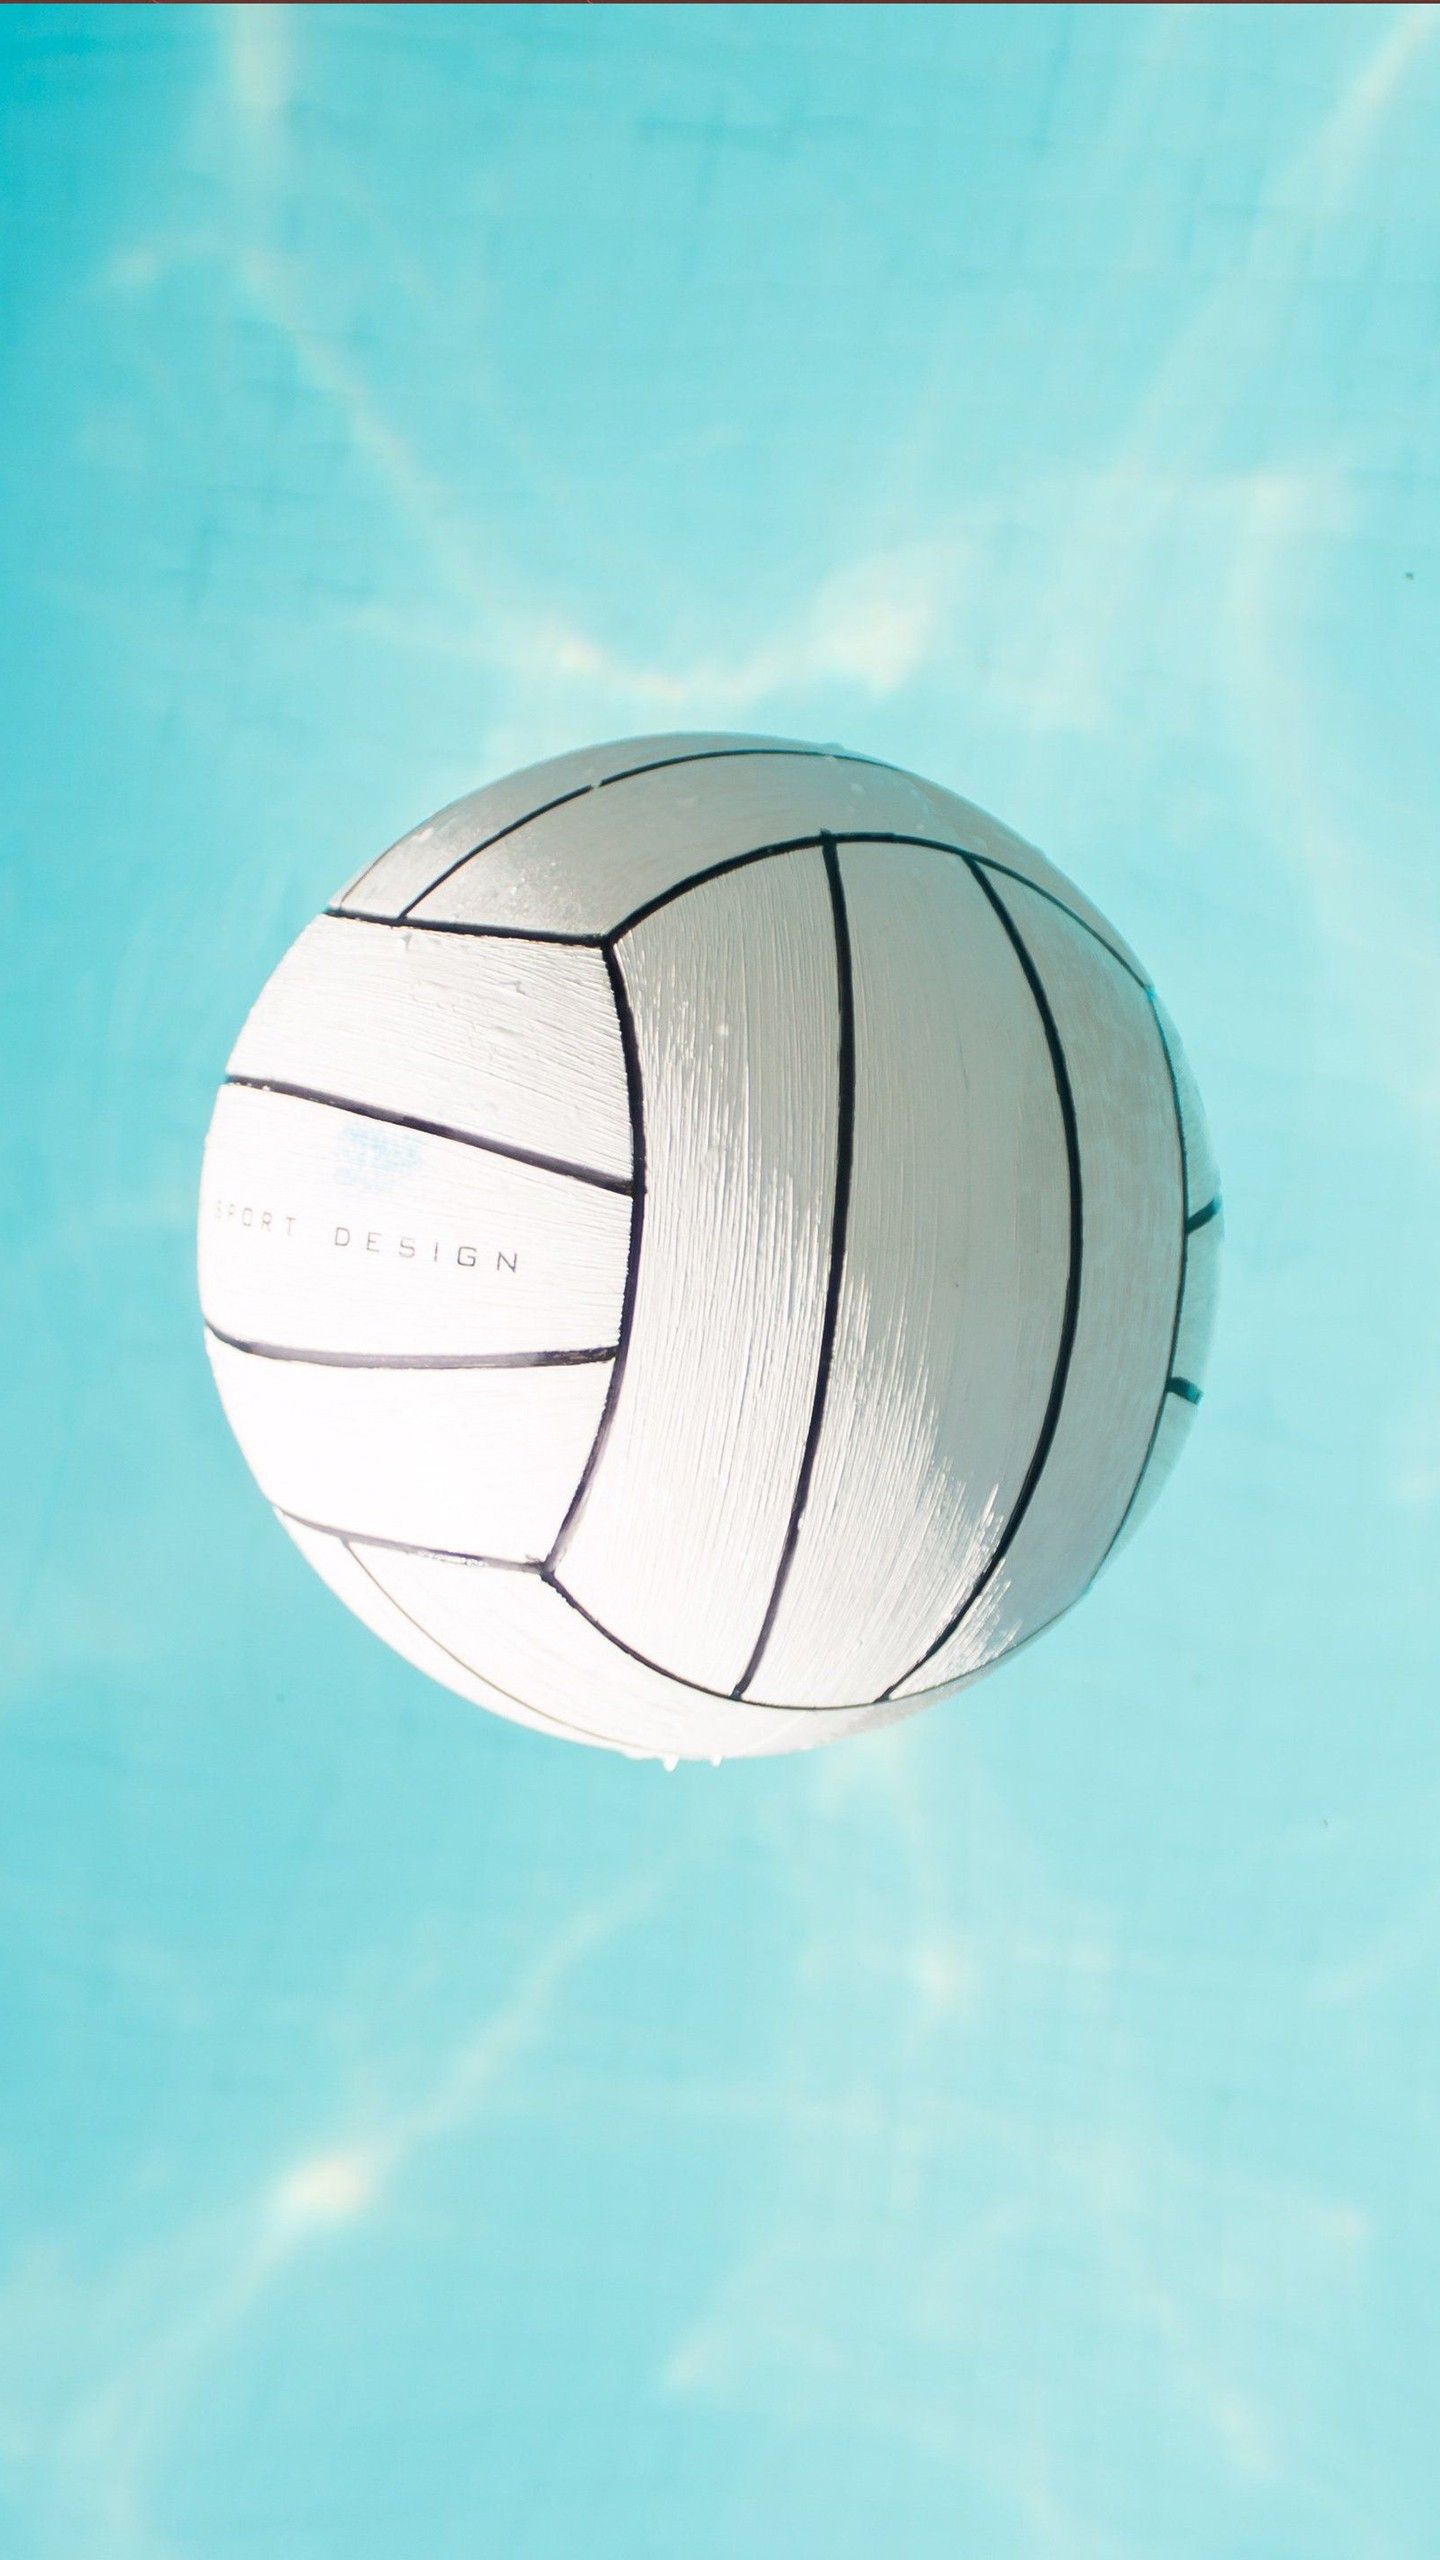 A volleyball floating in a pool - Volleyball